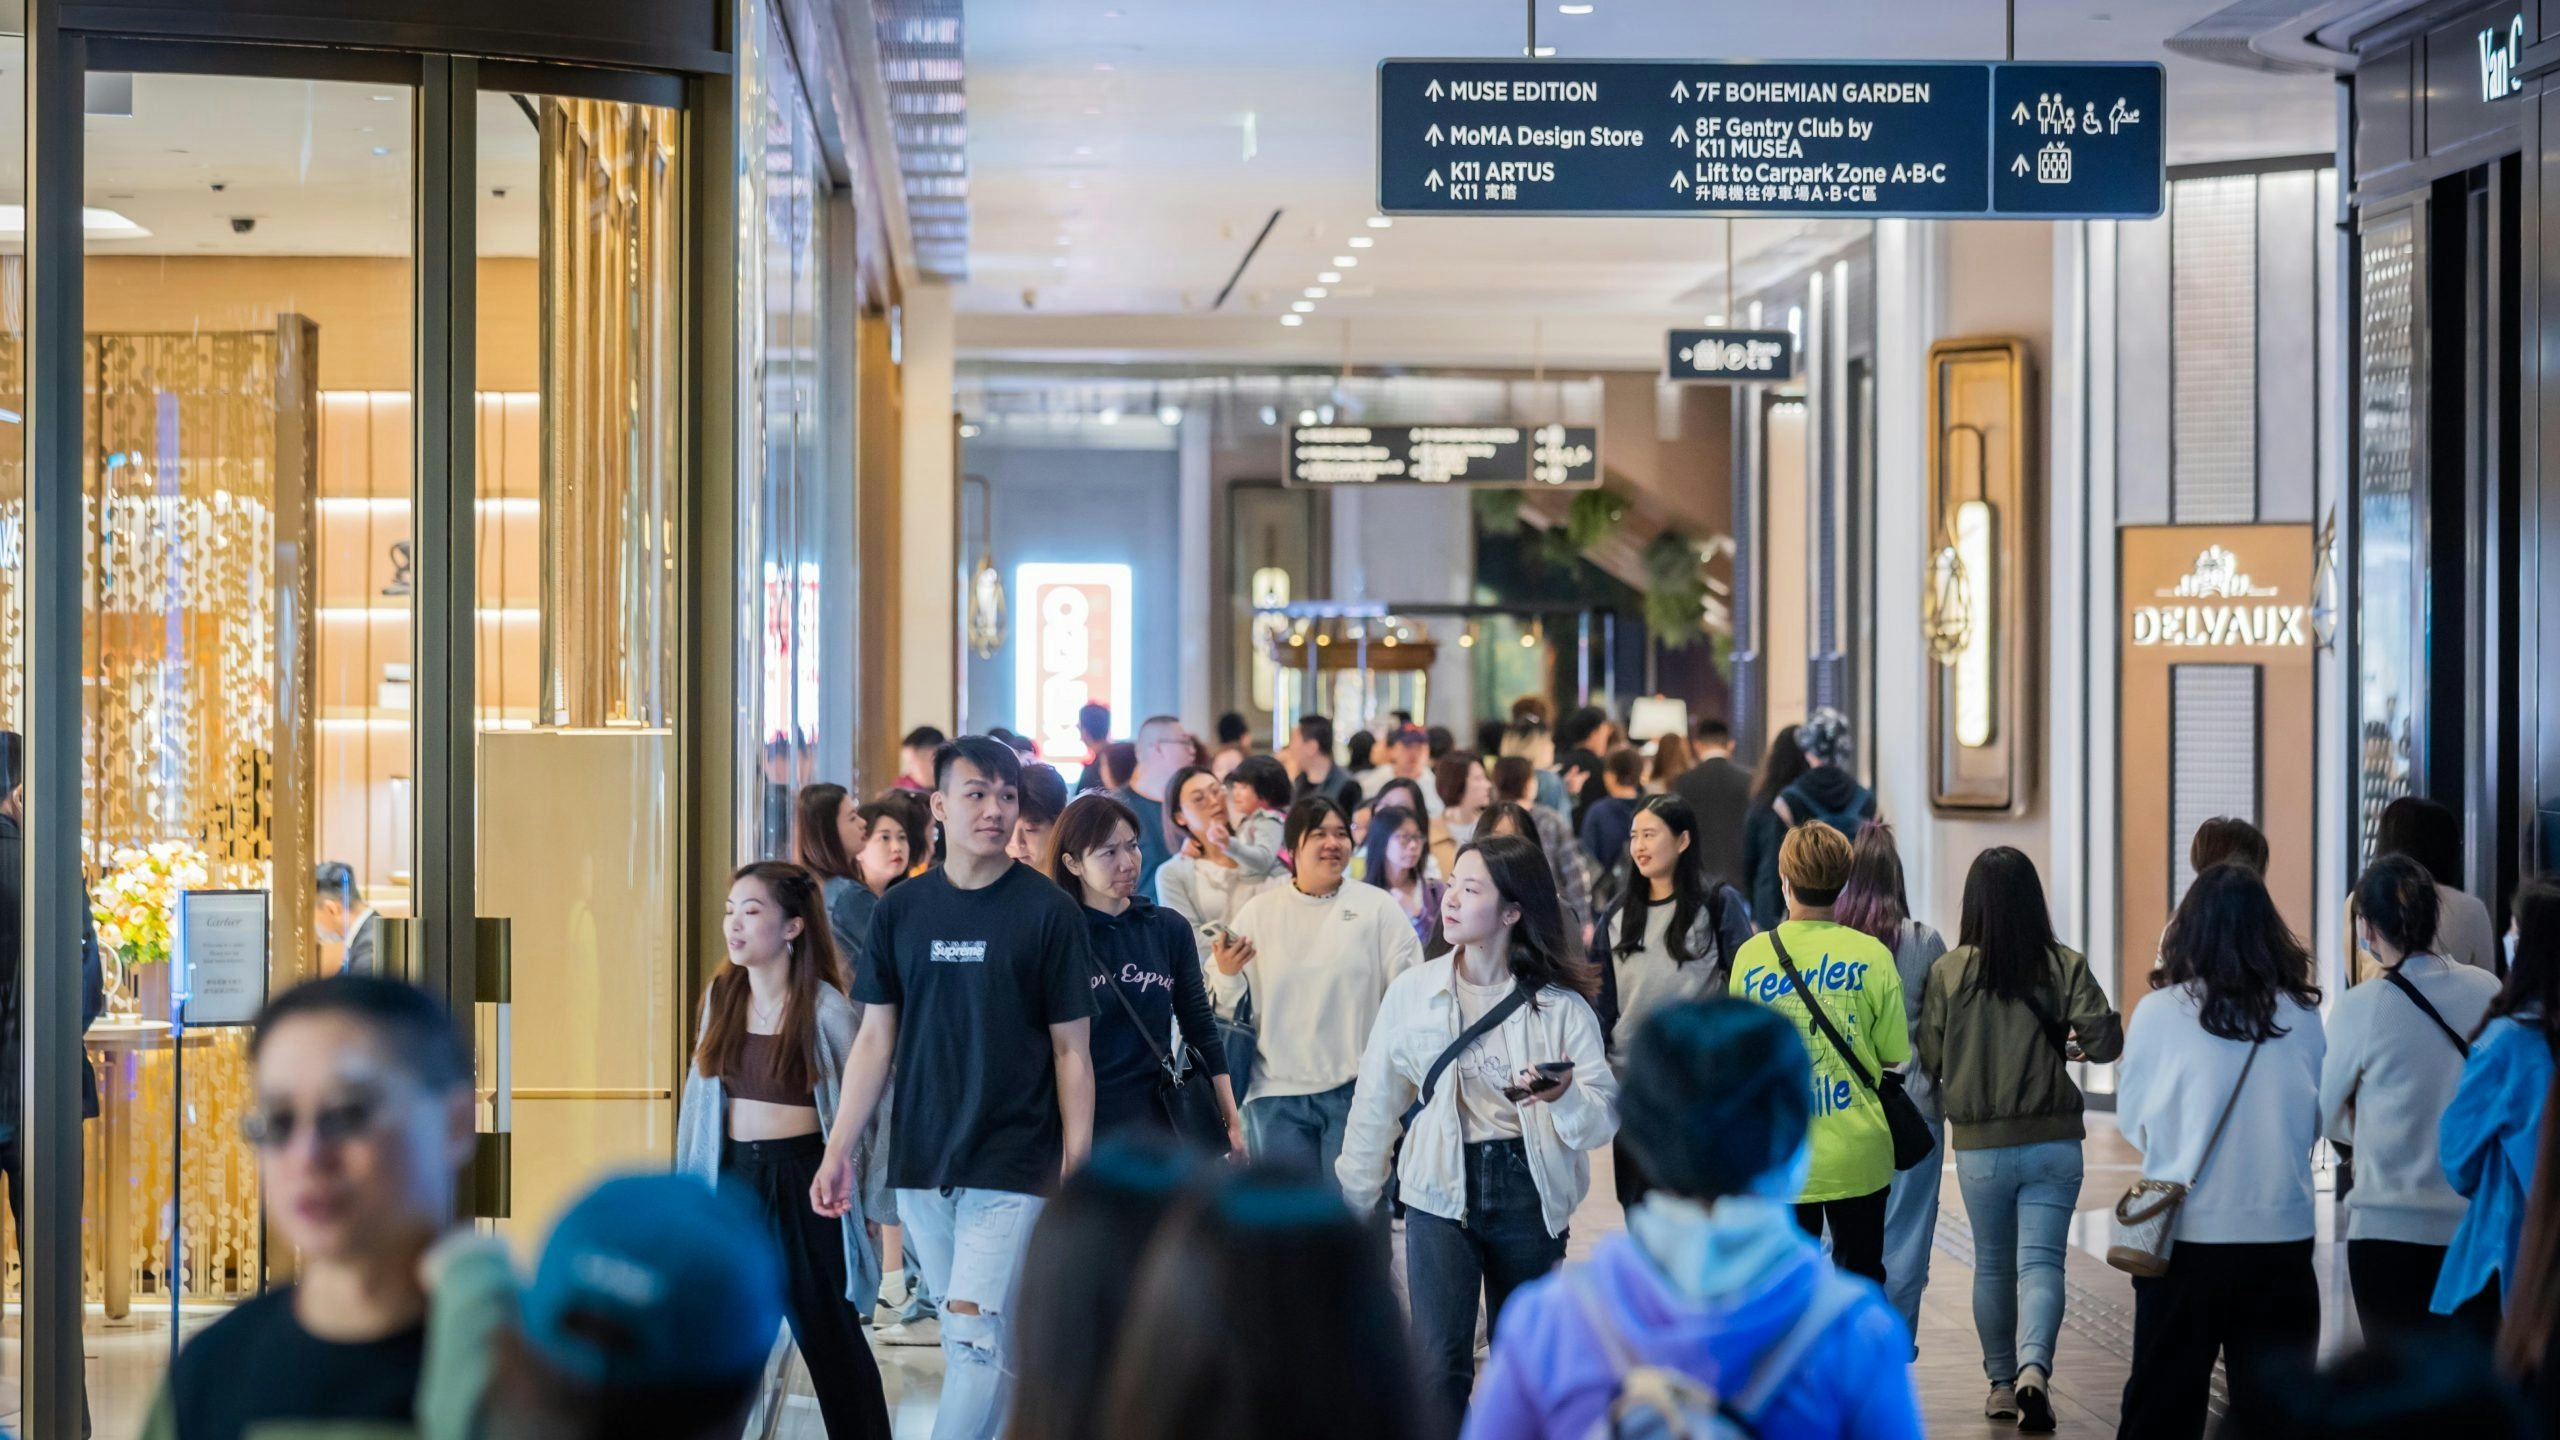 Hong Kong’s retail sales jumped 31.3 percent in February due to low 2022 figures and an upswing in tourist arrivals. But is it too early to get excited? Photo: K11 Musea